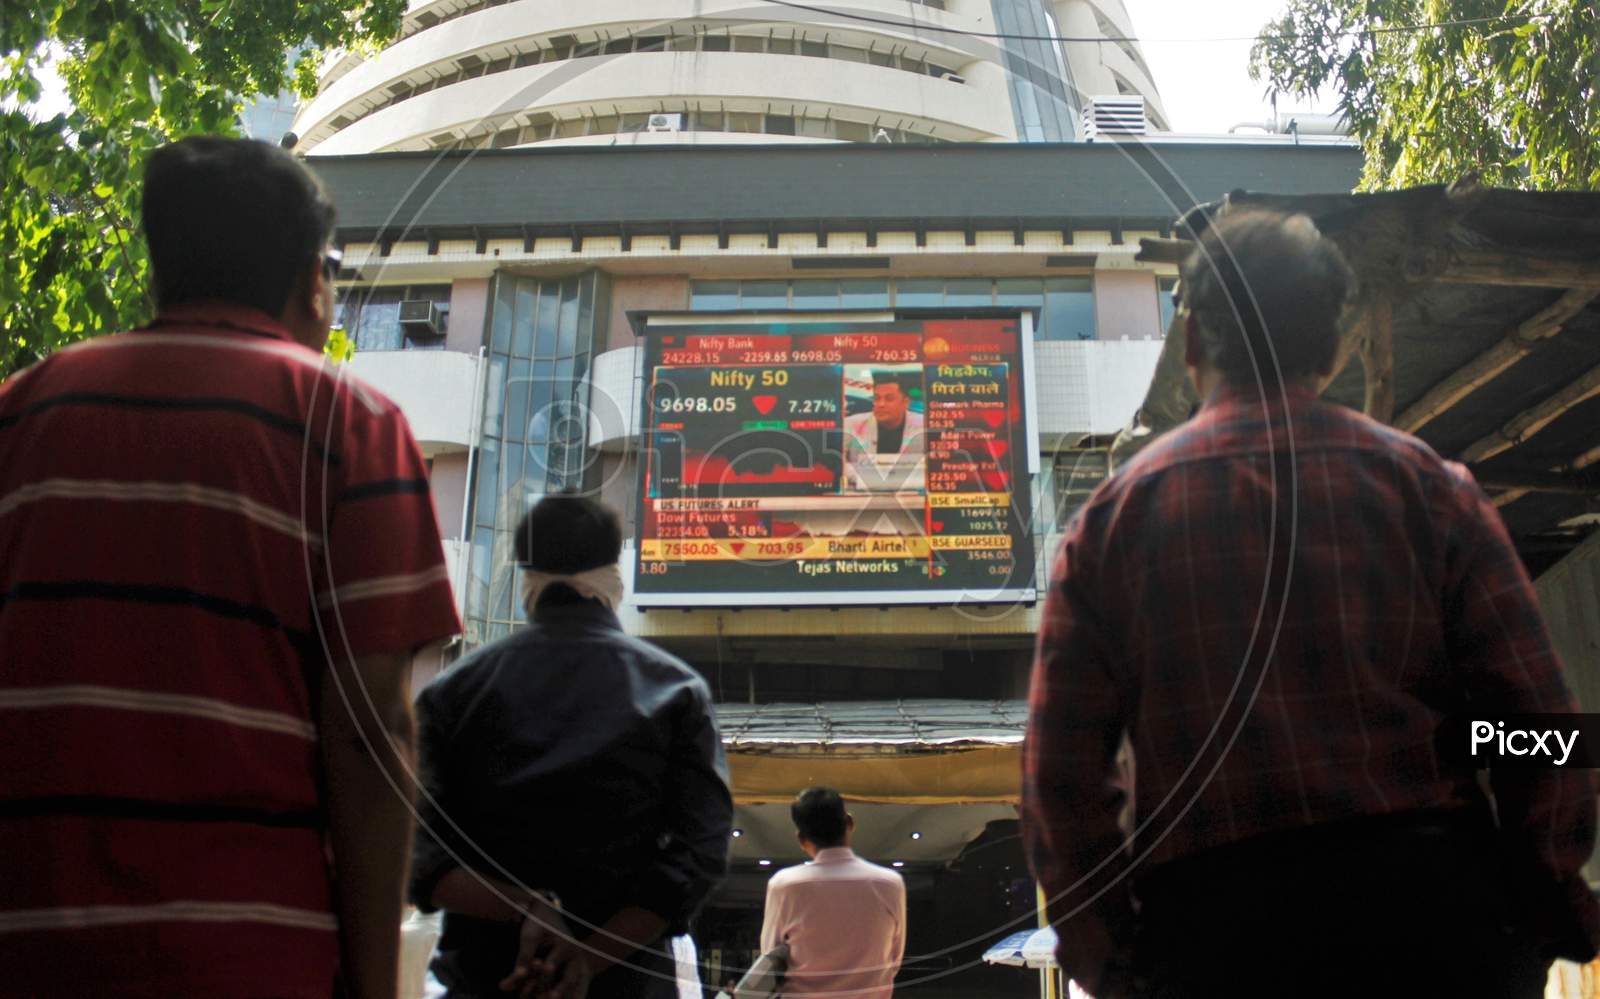 People look at a screen displaying the Sensex results following the coronavirus outbreak, on the facade of the Bombay Stock Exchange (BSE) building in Mumbai, India on March 12, 2020.